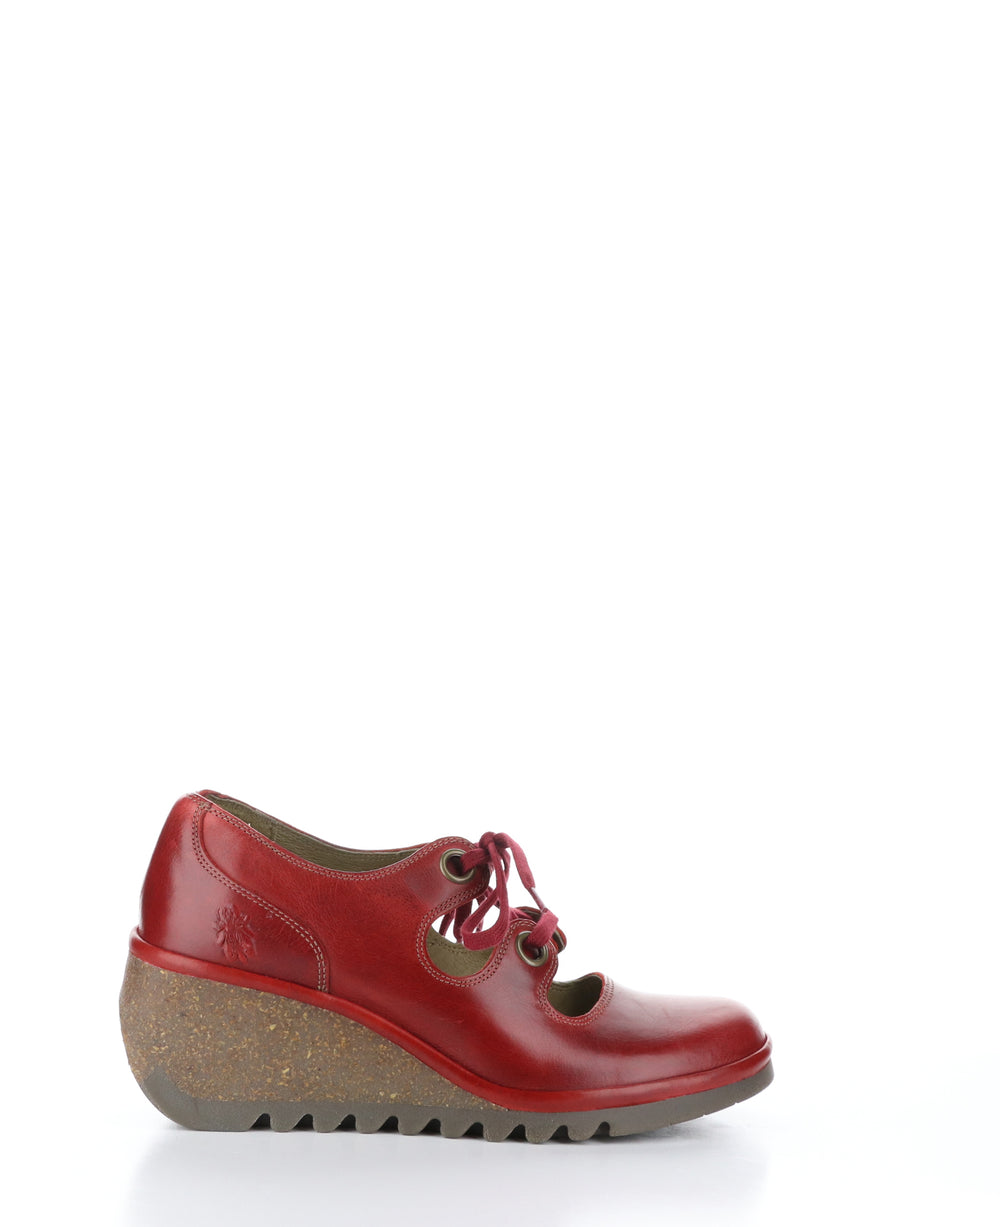 NELY337FLY Red Round Toe Shoes|NELY337FLY Chaussures à Bout Rond in Rouge